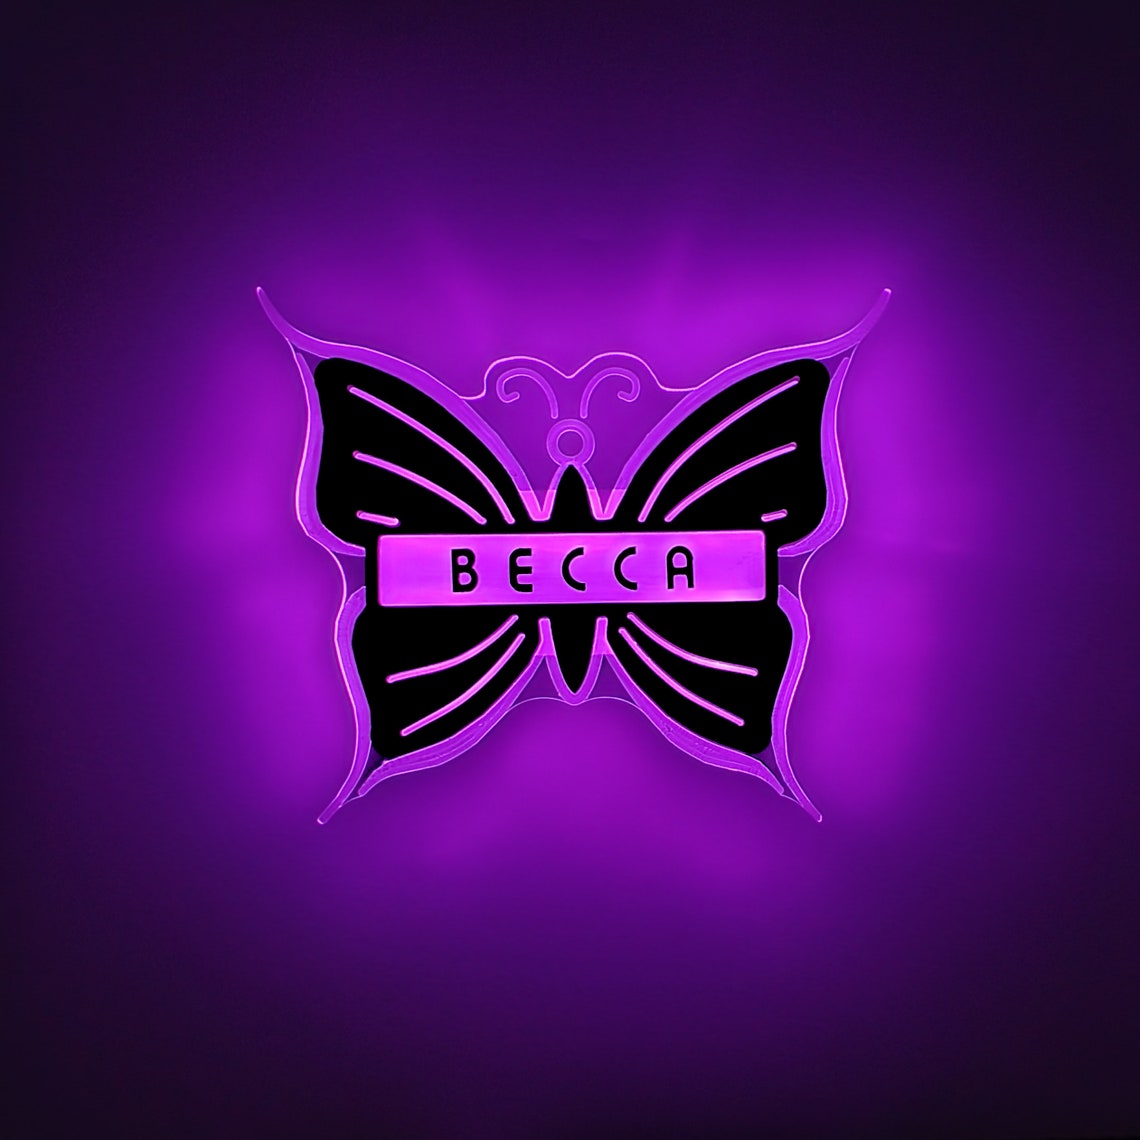 Butterfly | Edge Lit Acrylic Signs